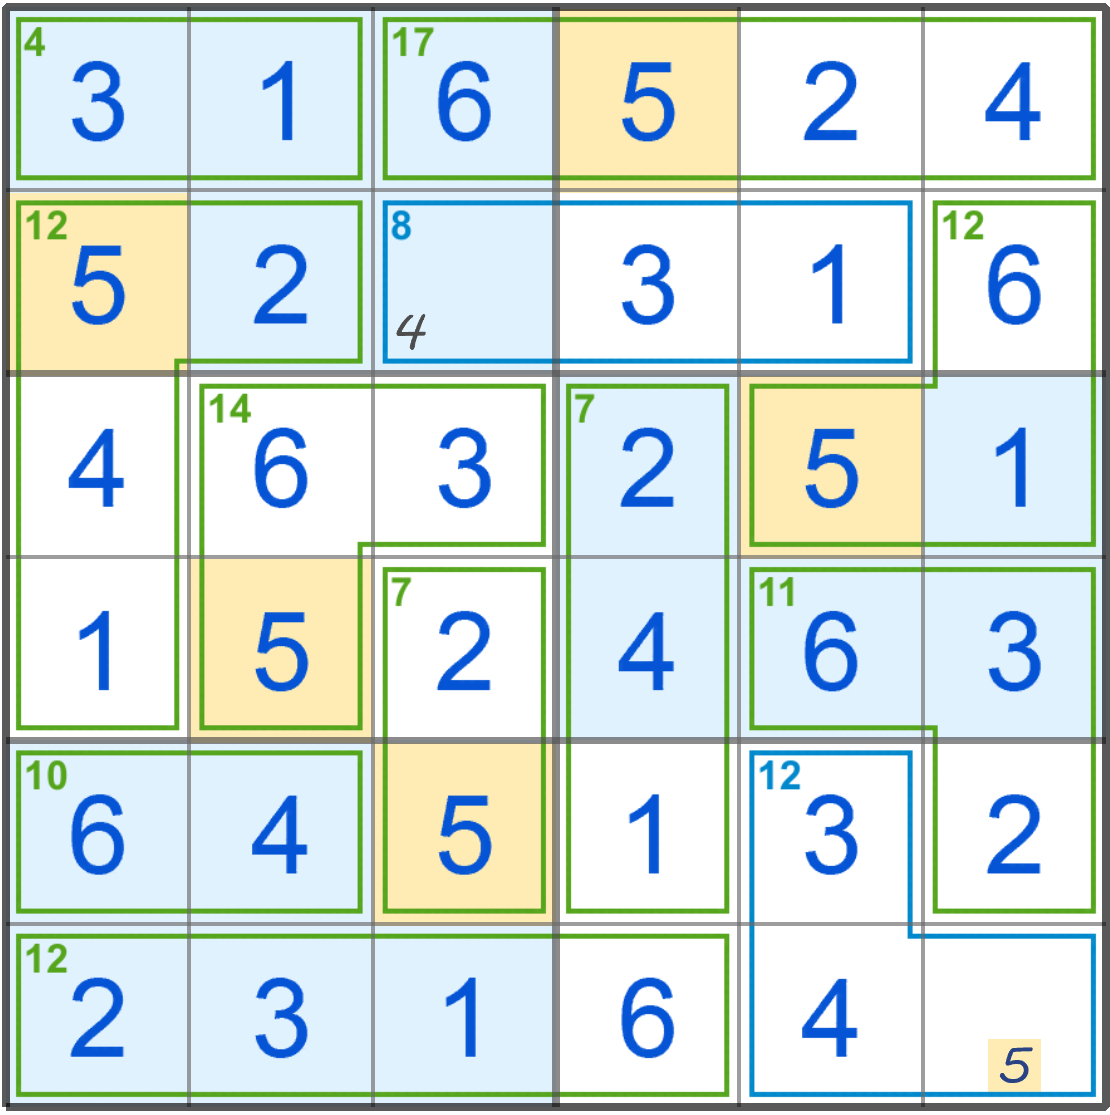 Puzzle Page Killer Sudoku March 27 2021 Answers PuzzlePageAnswers net